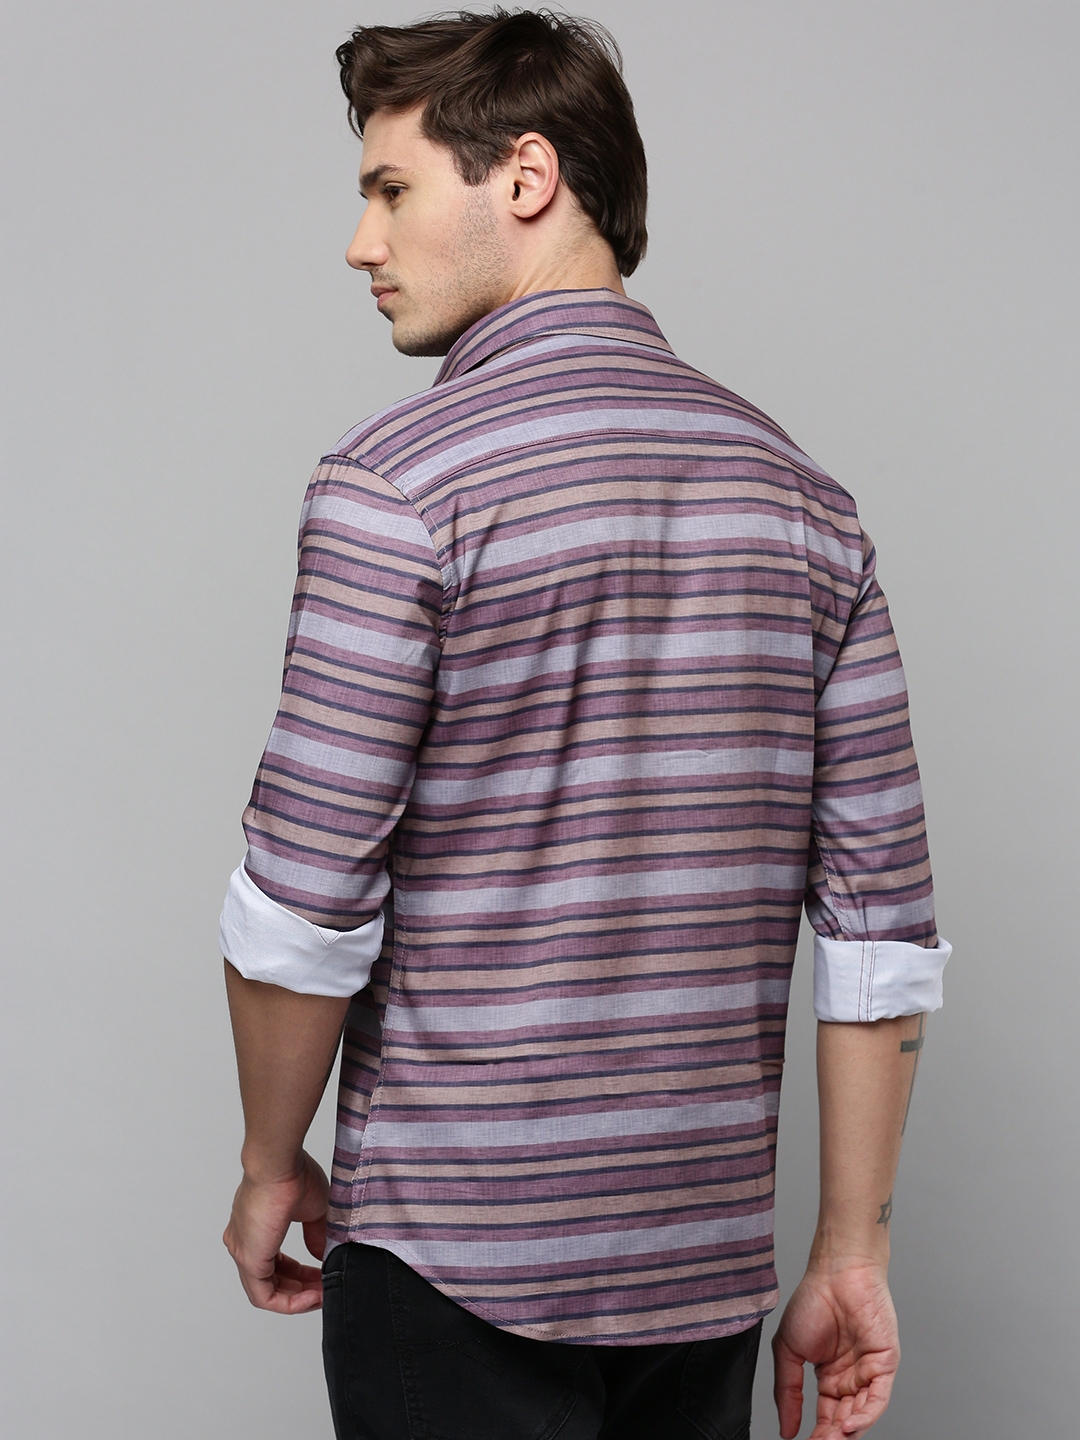 Showoff | SHOWOFF Men's Spread Collar Long Sleeves Striped Multi Shirt 3